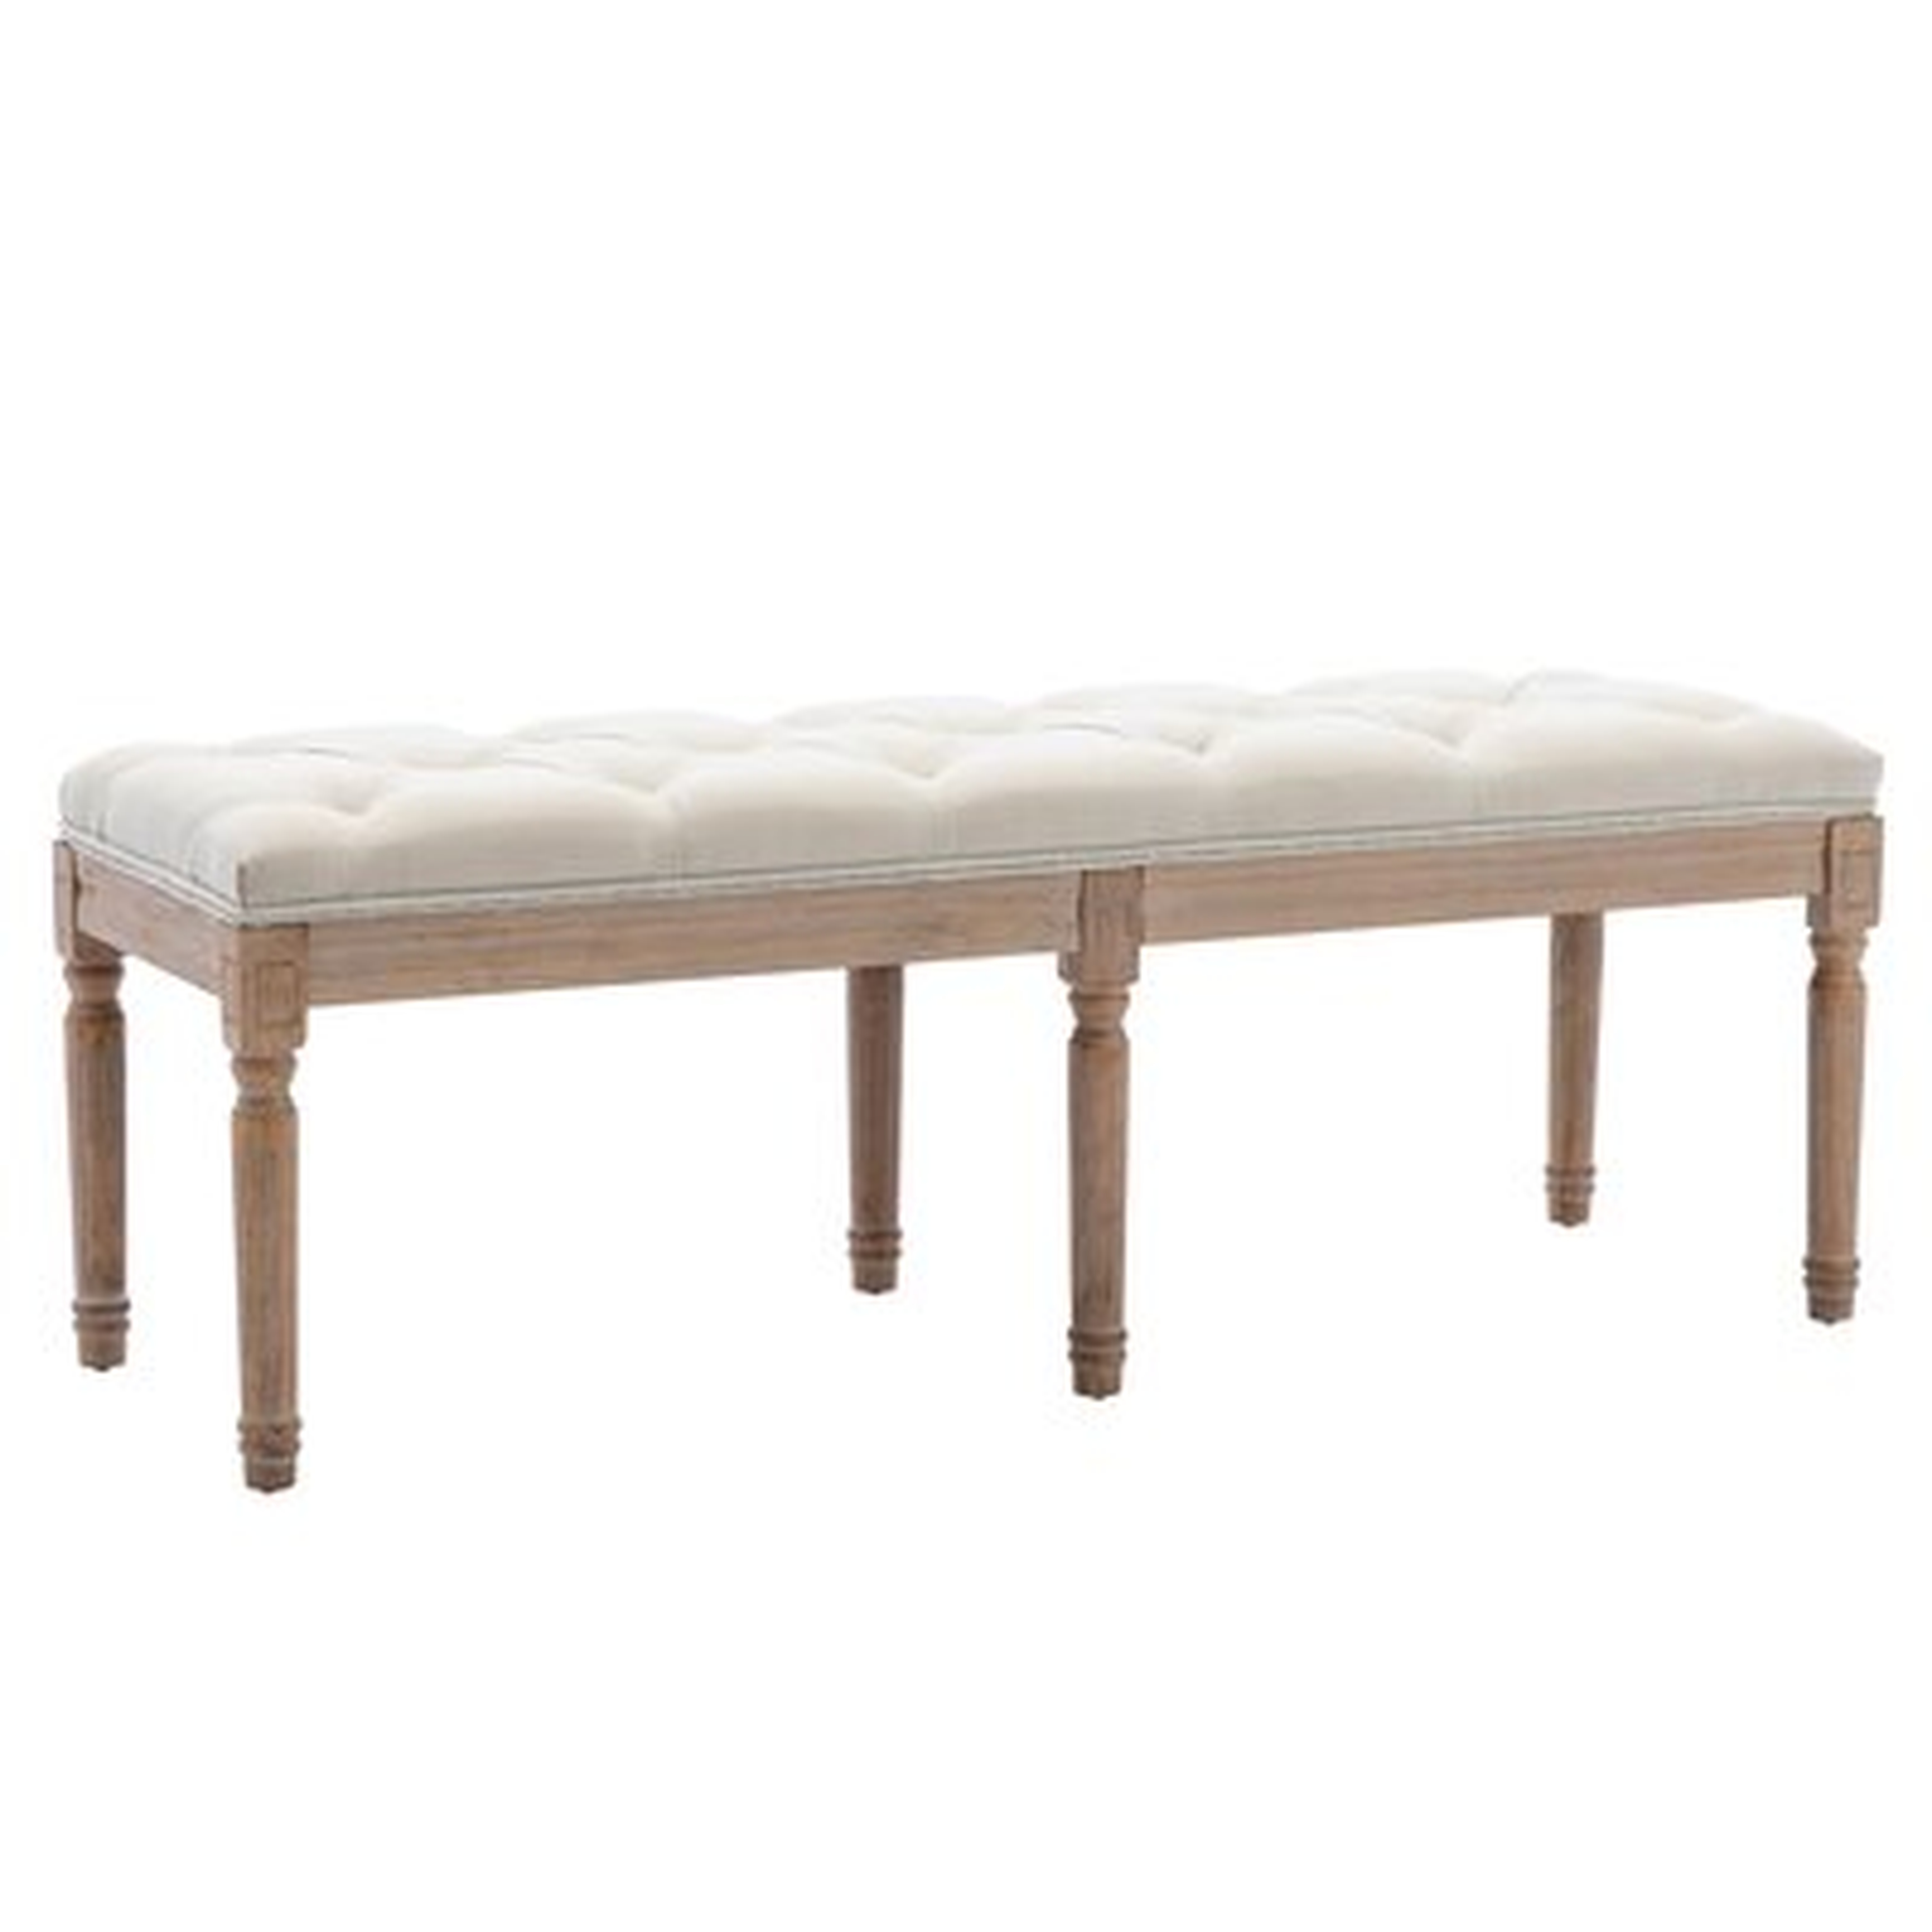 Rectangular French Style Fabric Bench, Tufted Wooden Bench For Entryway/Bedroom - Wayfair